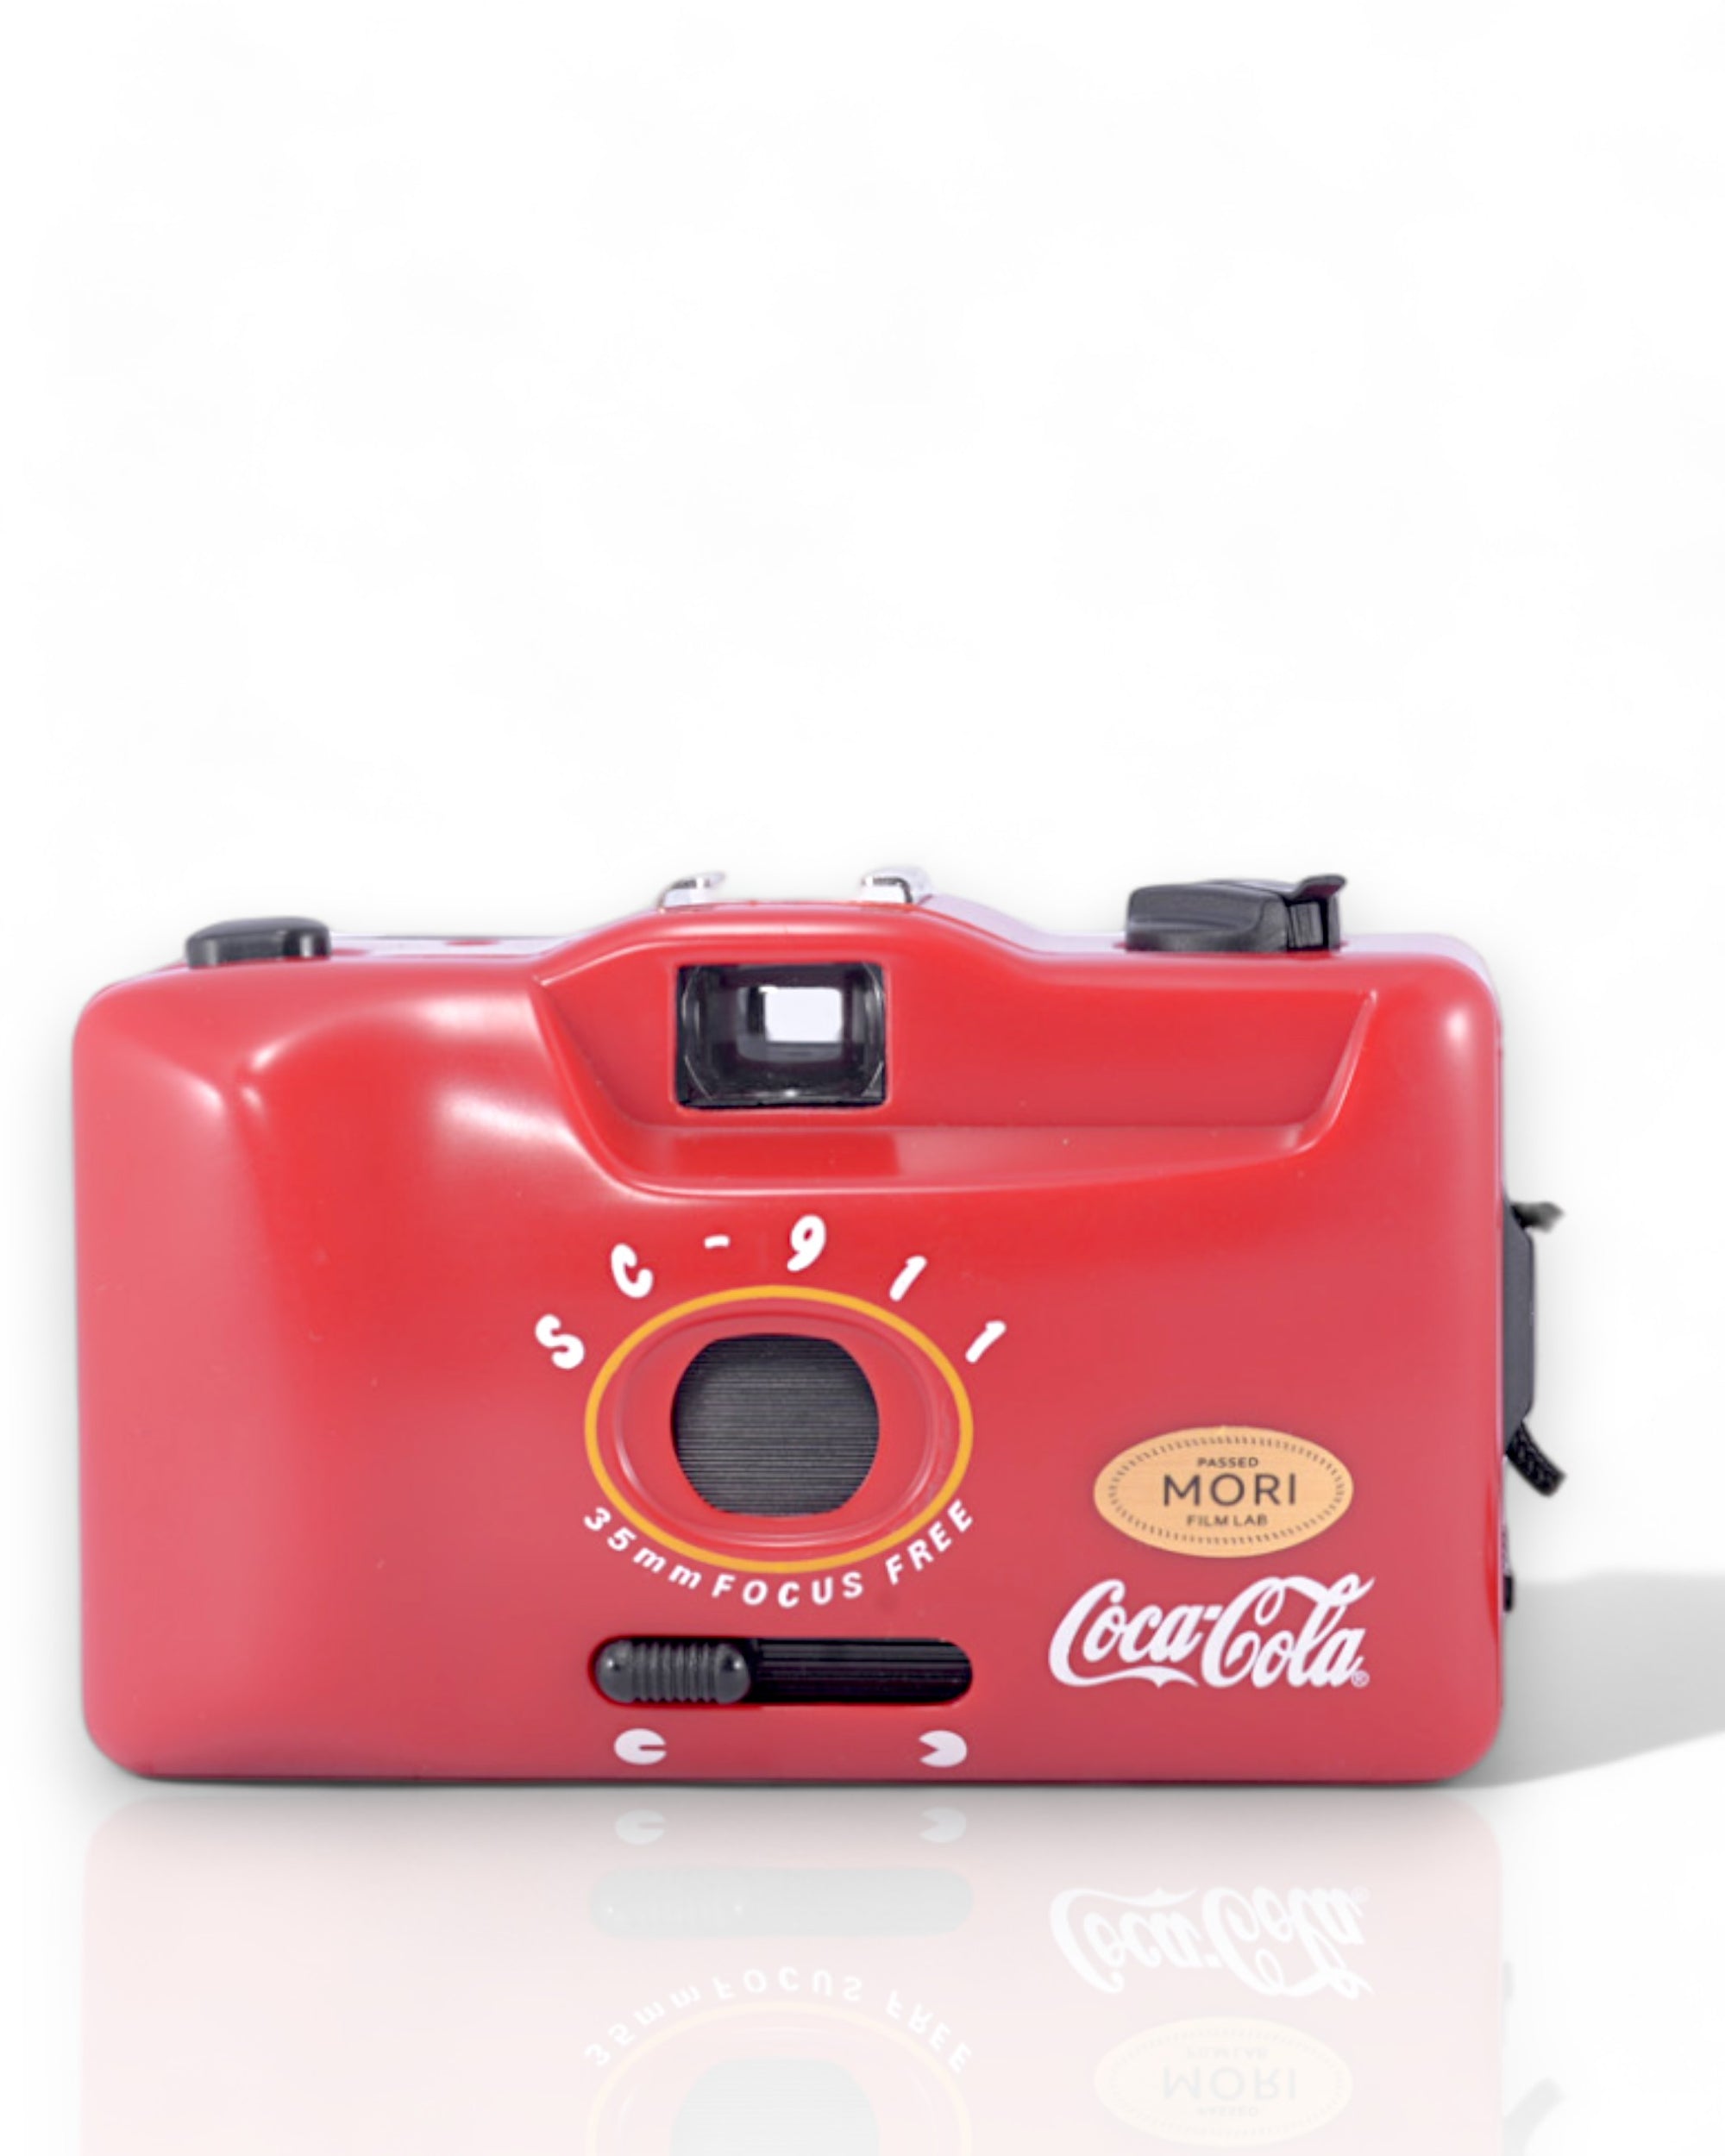 Coca Cola 35mm Point & Shoot film camera with 35mm lens